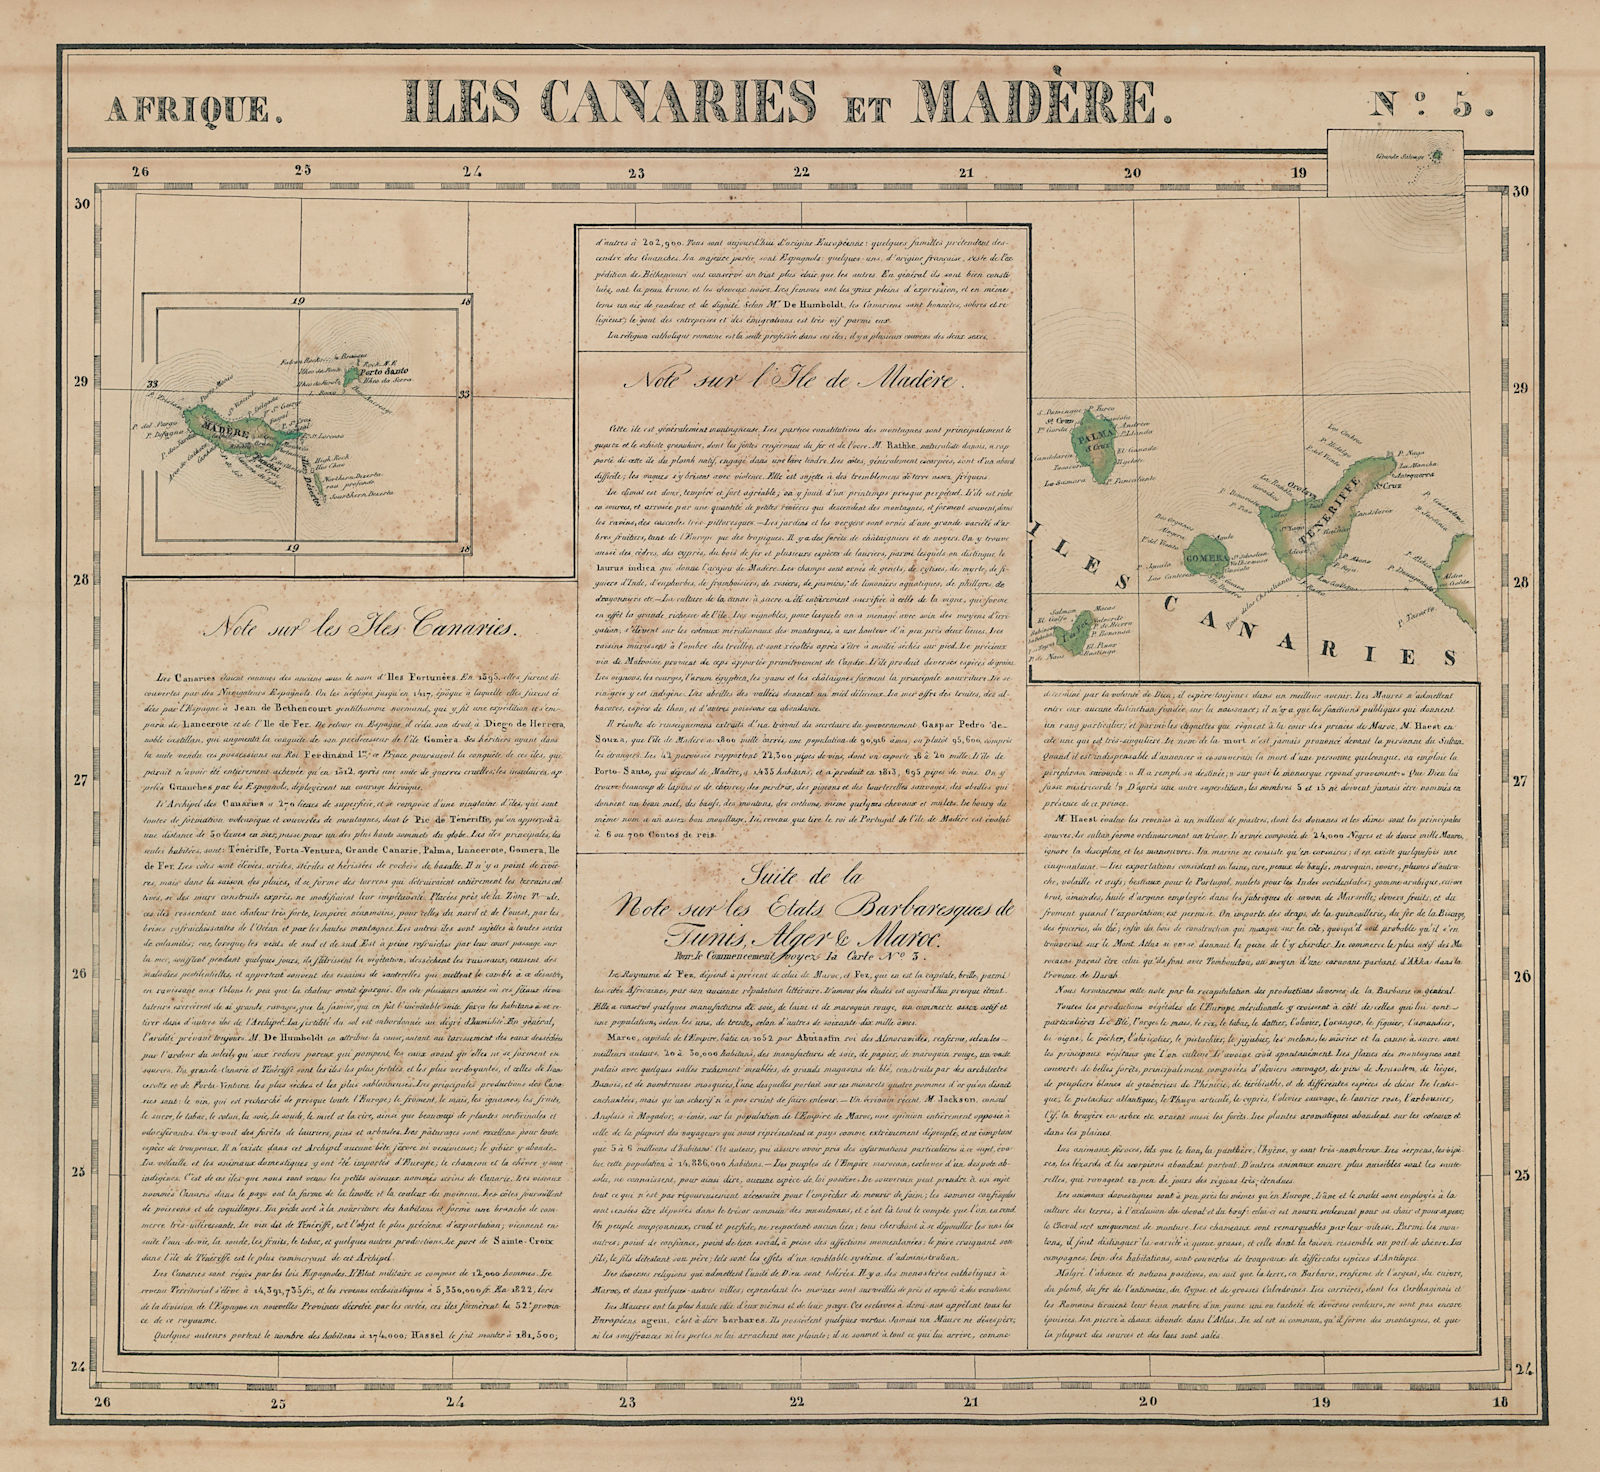 Afrique. Iles Canaries et Madère #5 Canary Islands Madeira VANDERMAELEN 1827 map